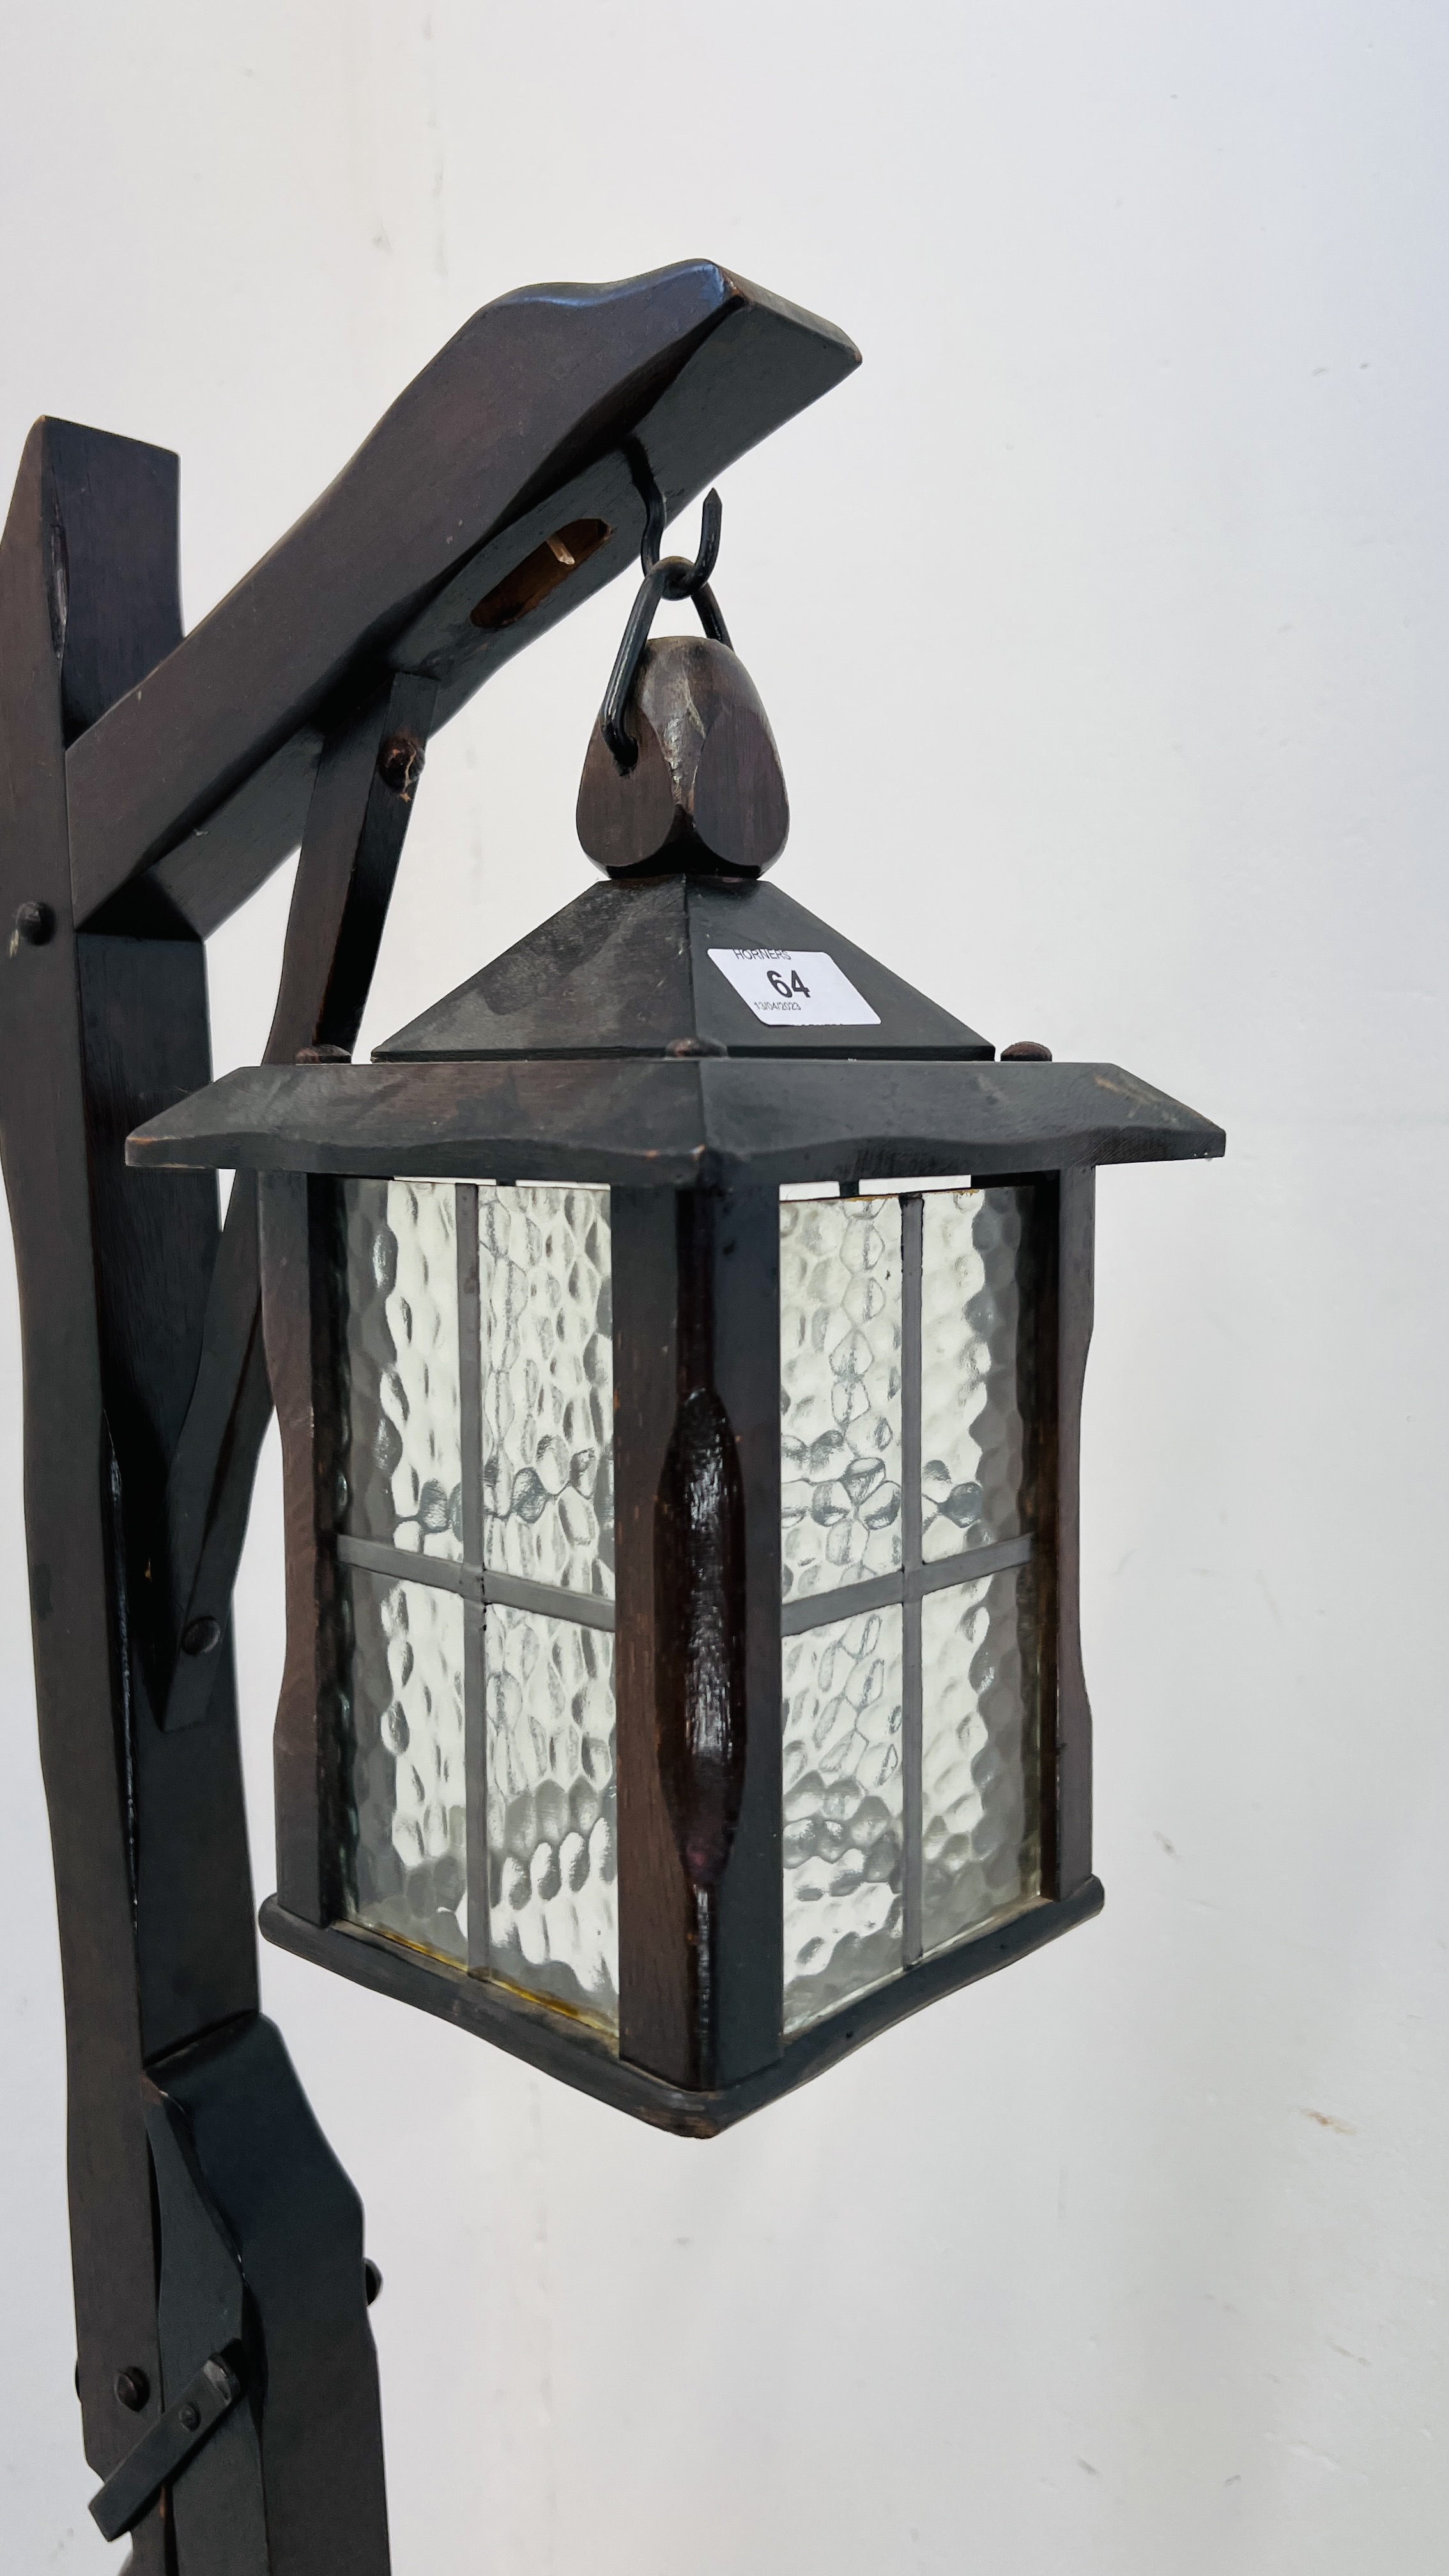 A VINTAGE ADJUSTABLE FLOOR STANDING LANTERN - WIRE REMOVED. - Image 2 of 7